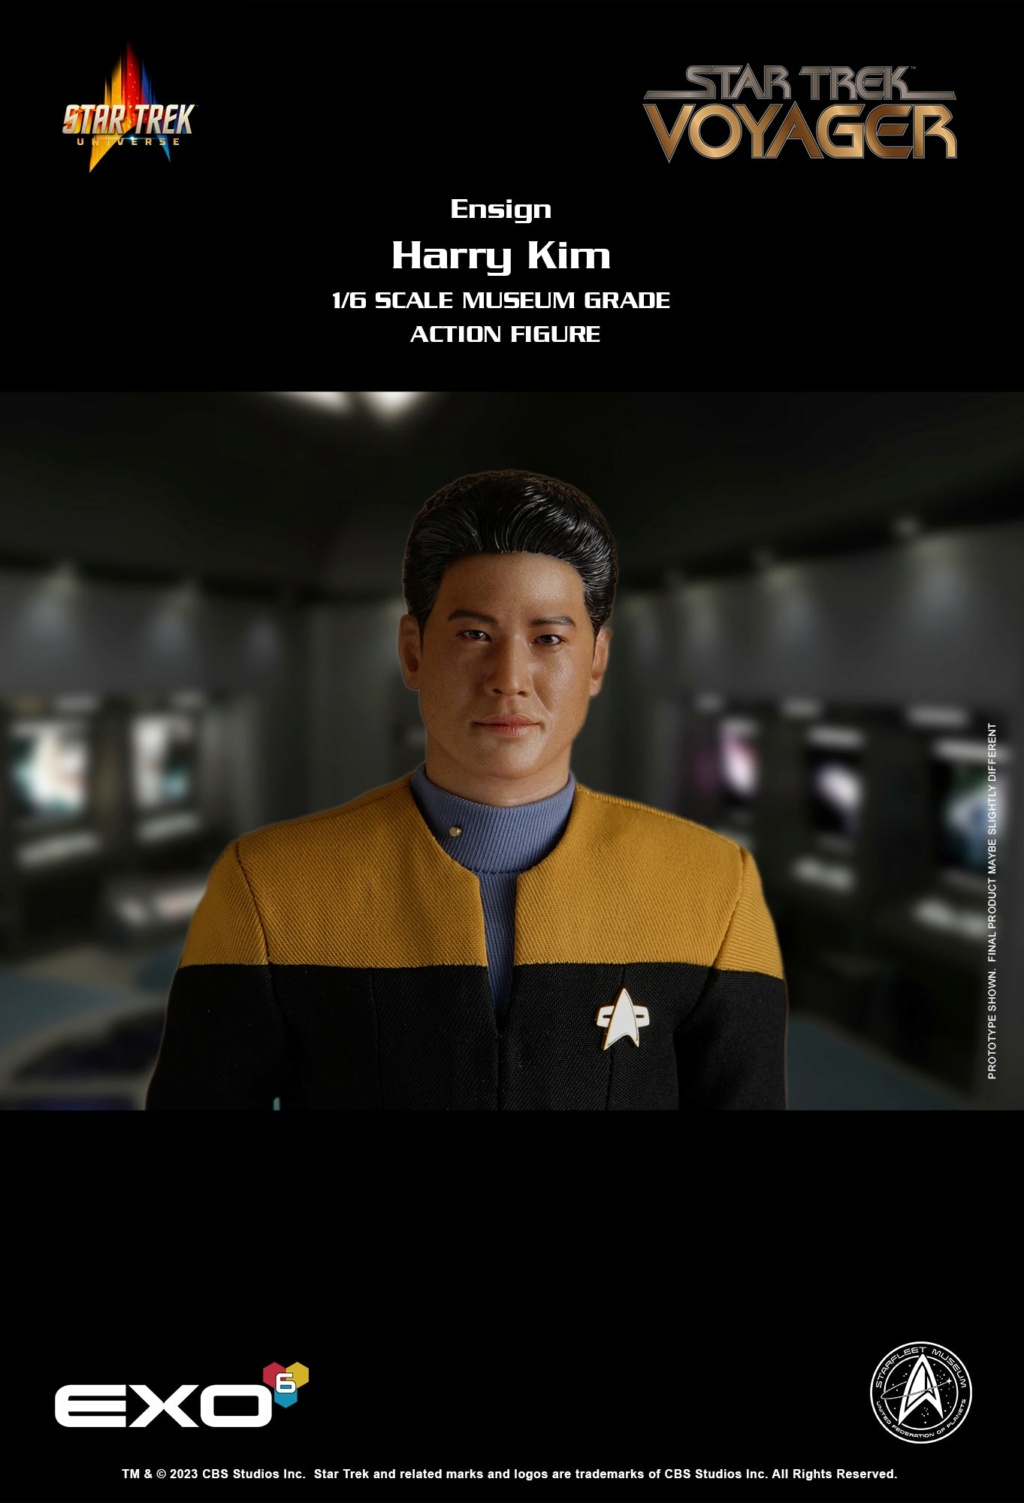 Voyager - NEW PRODUCT: EXO-6: STAR TREK - VOYAGER: ENSIGN HARRY KIM 1/6 SCALE ACTION FIGURE Kim_0510